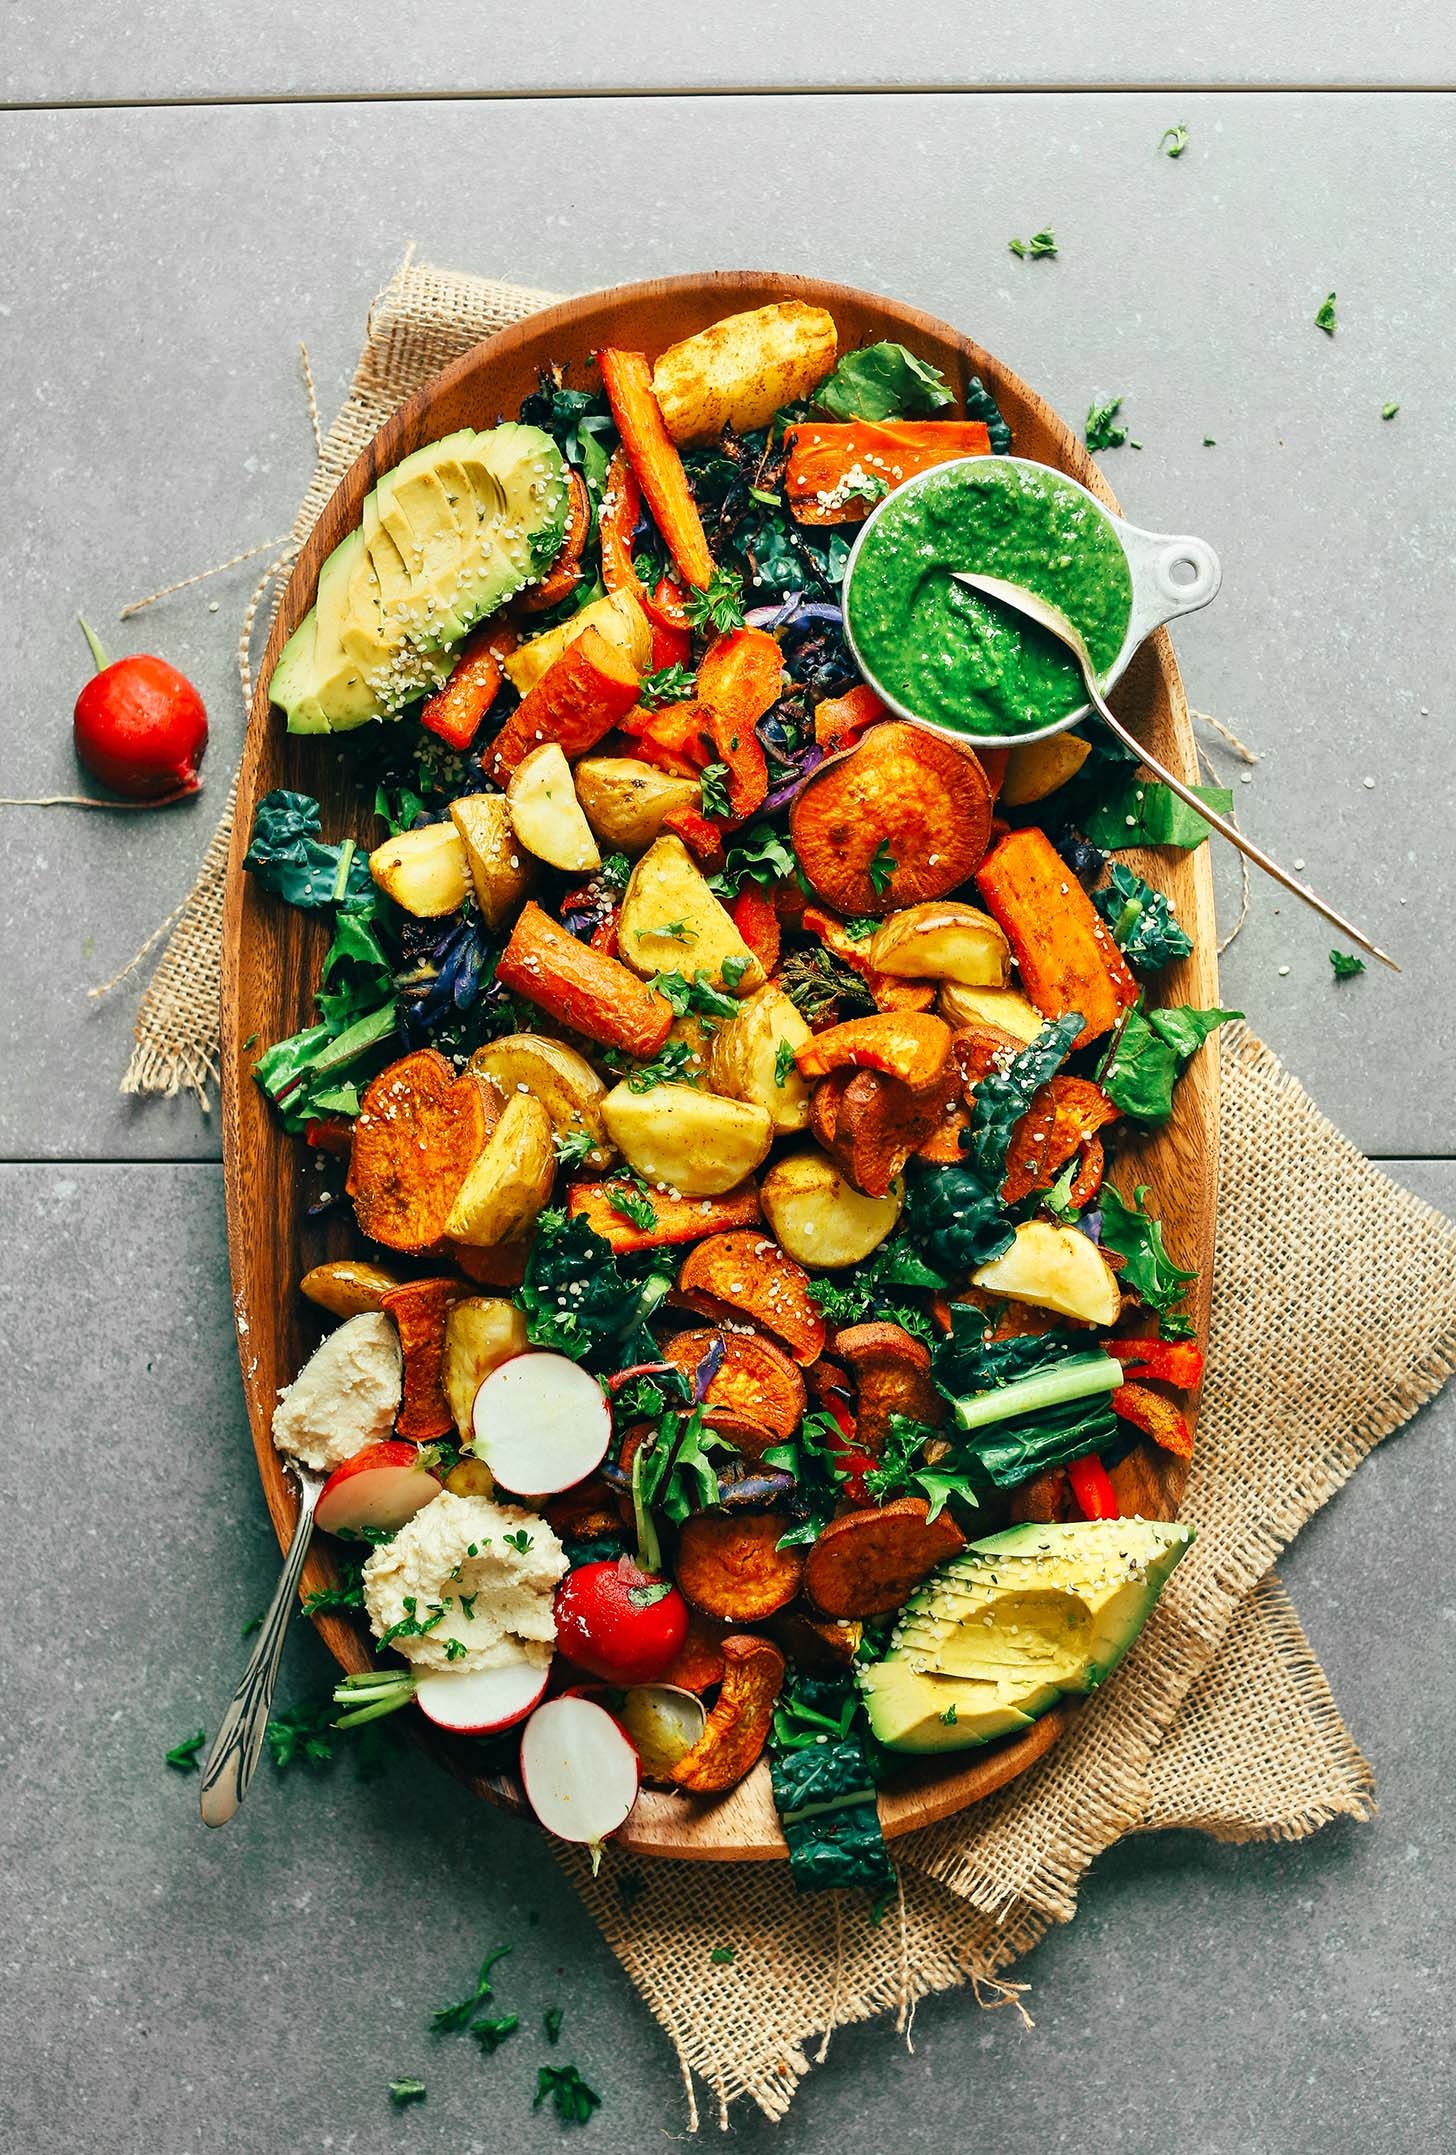 Wooden platter filled with Roasted Vegetable Salad & Chimichurri for a healthy plant-based meal